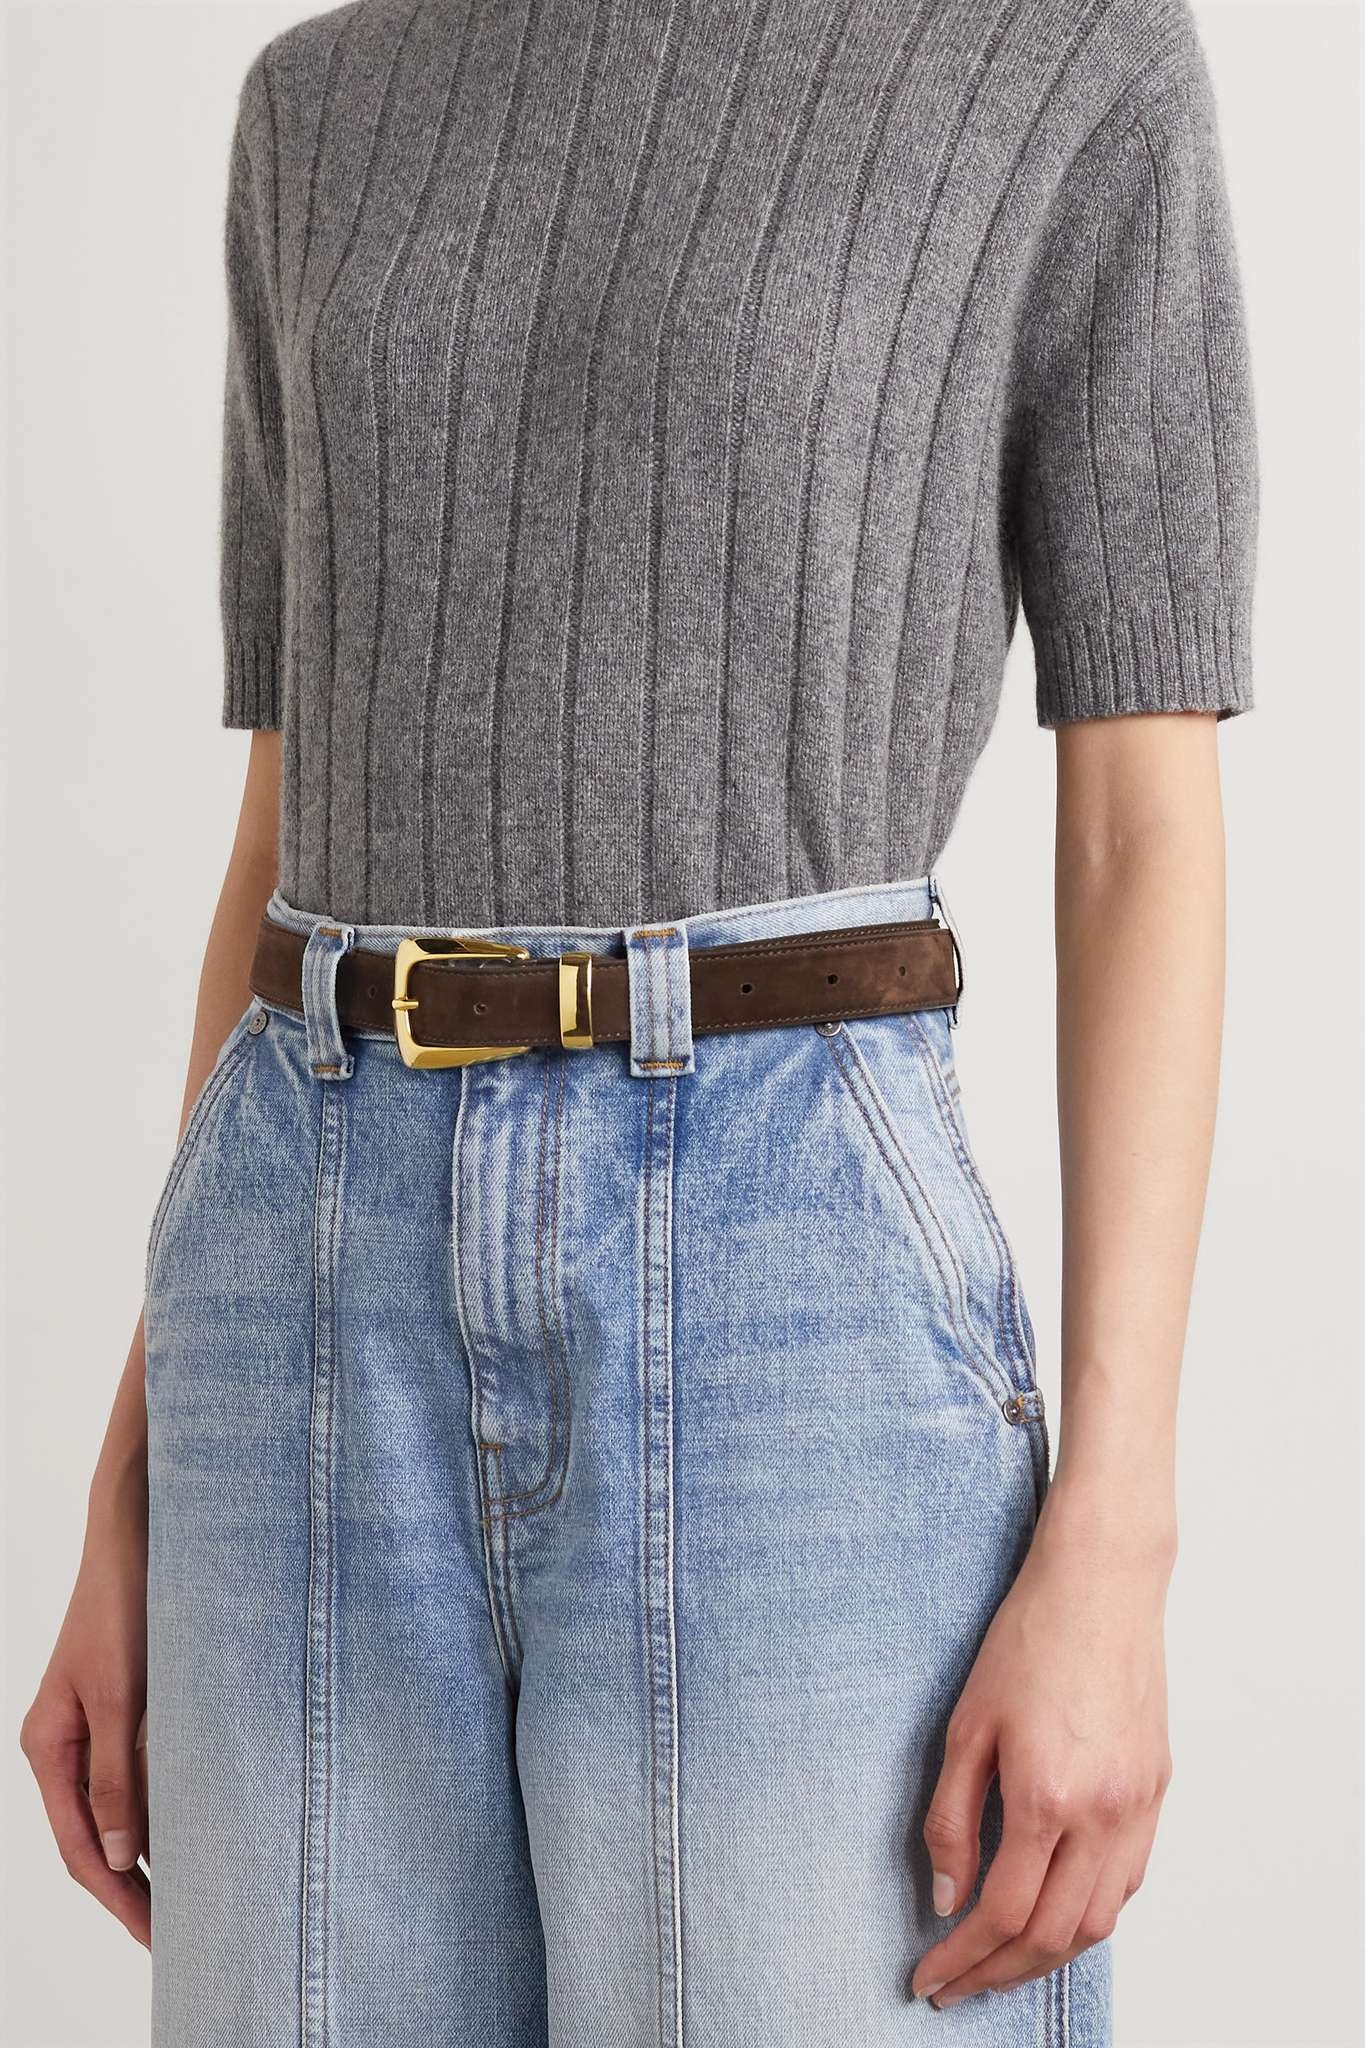 The Benny Belt in Coffee Suede with Gold– KHAITE